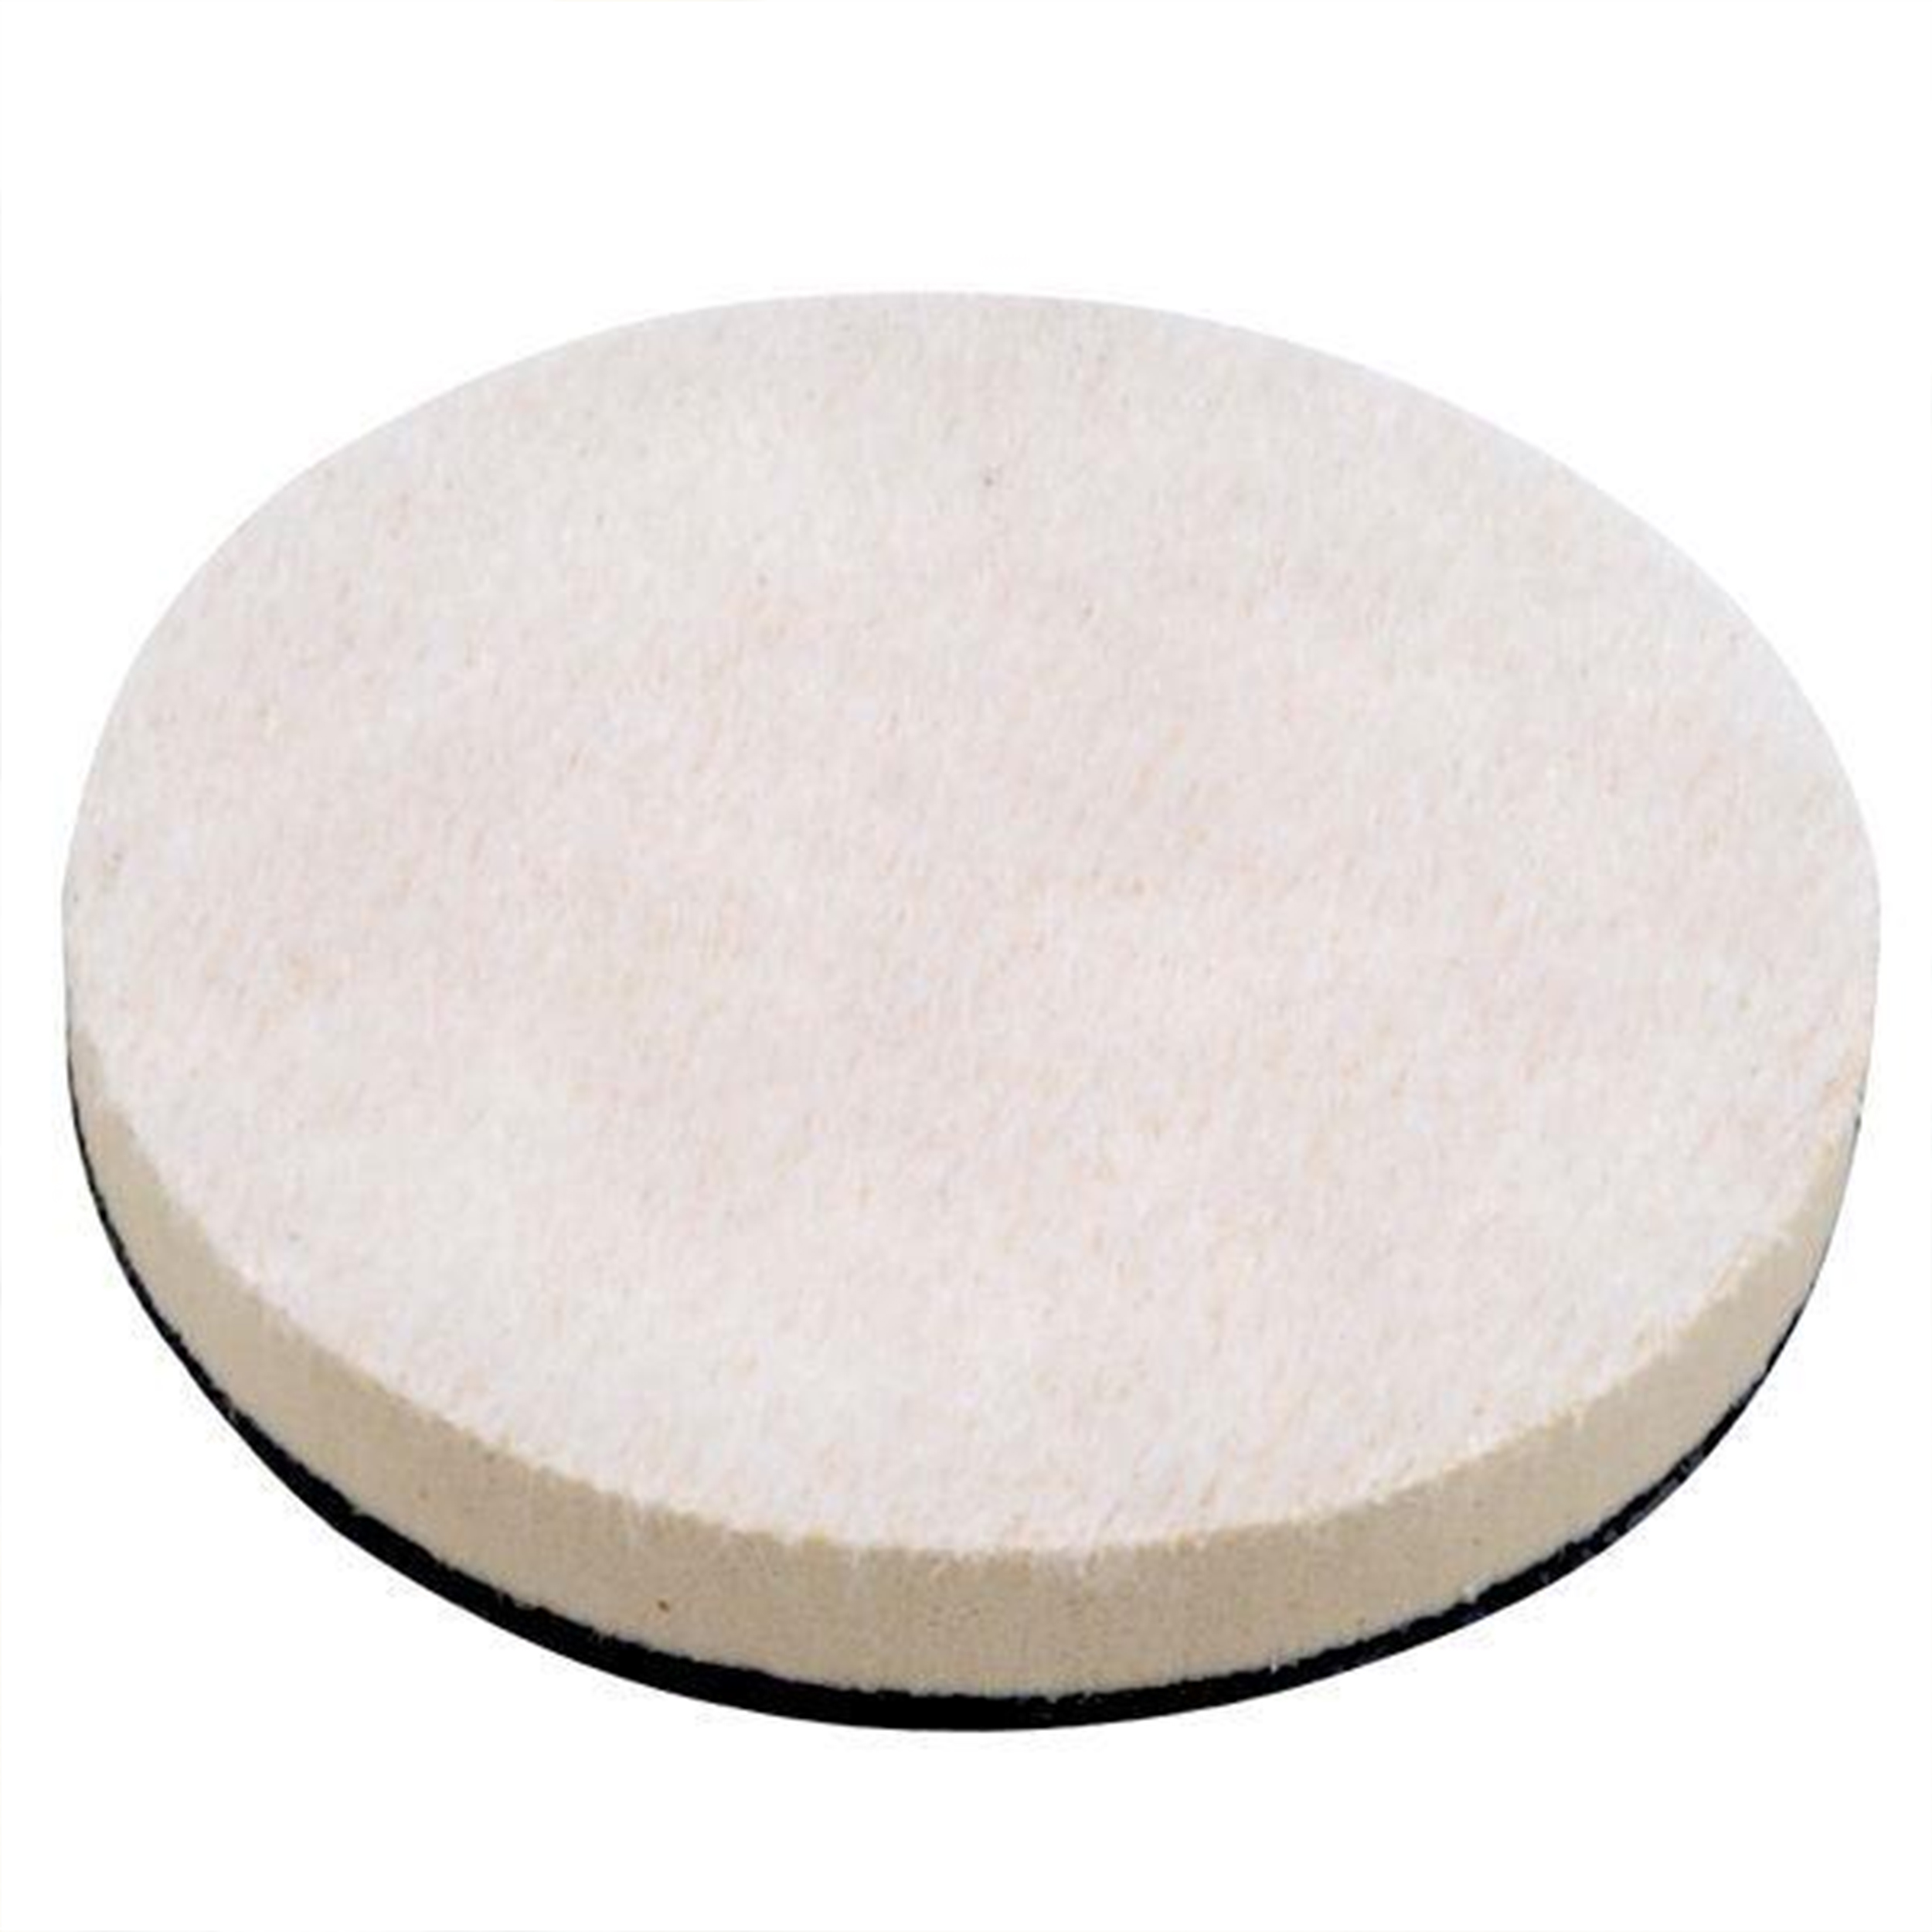 New Wave 2" Very Soft Interface Backing Pads